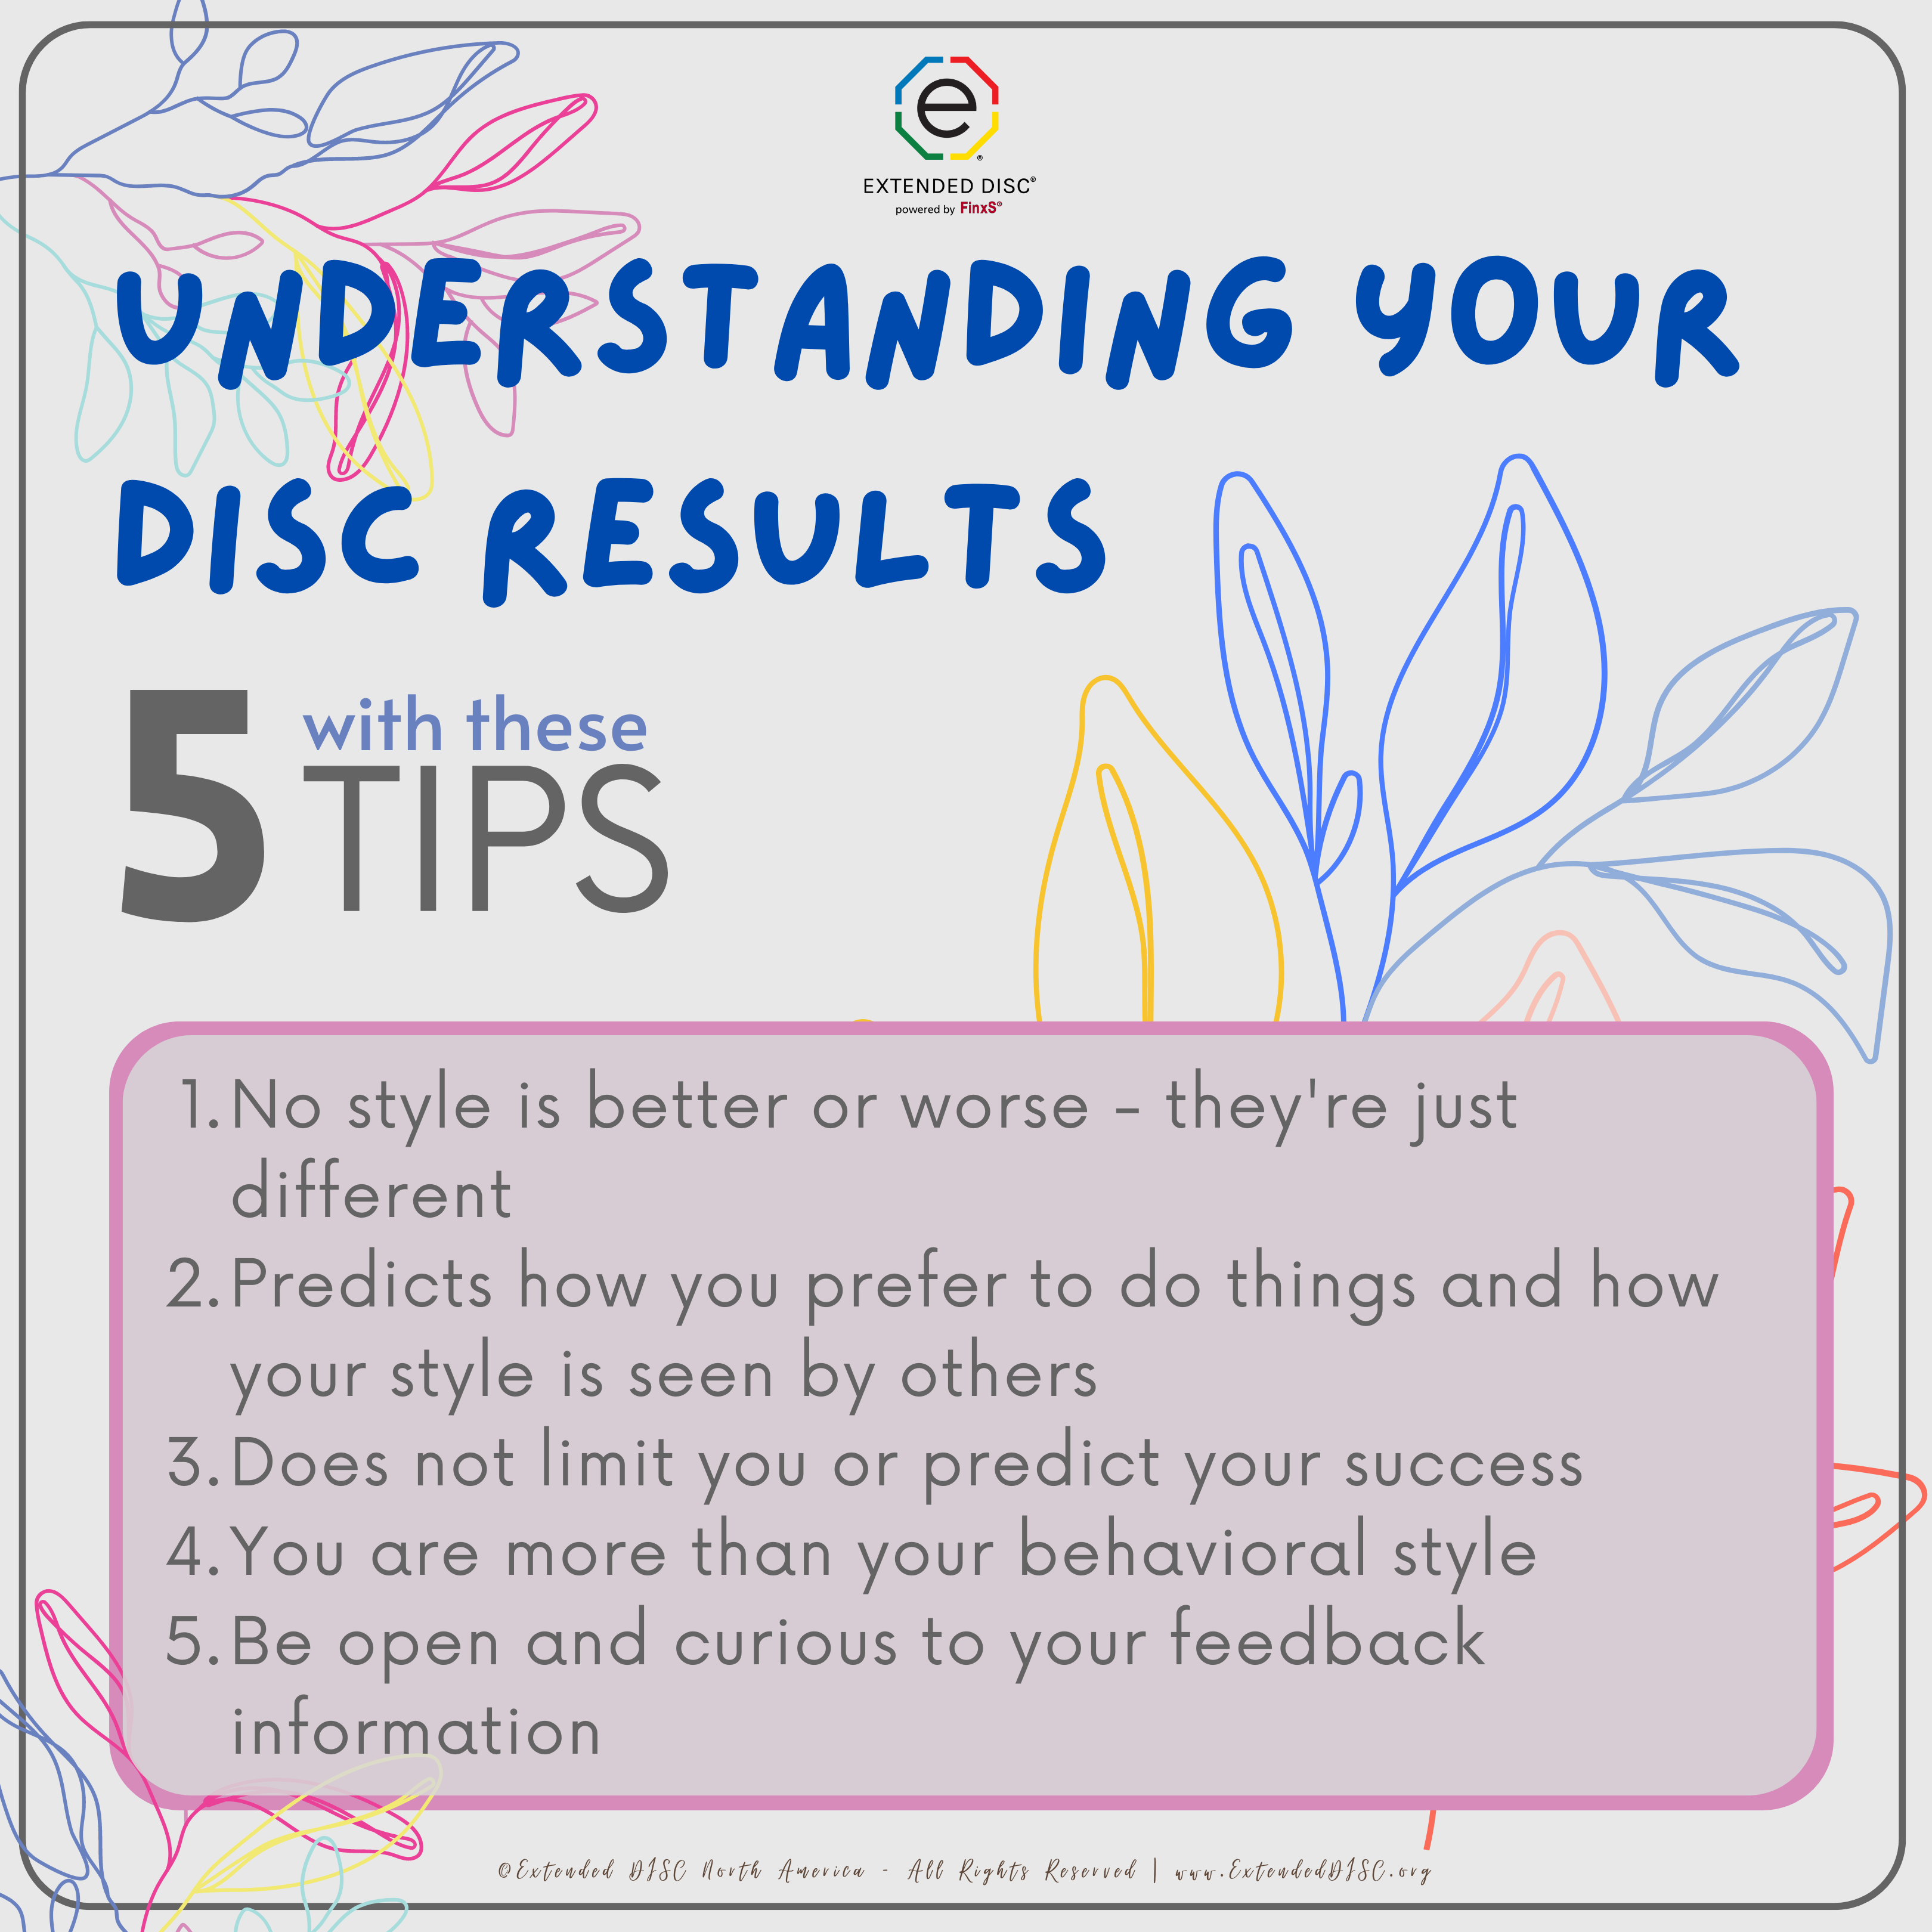 5 tips to understanding your DISC results